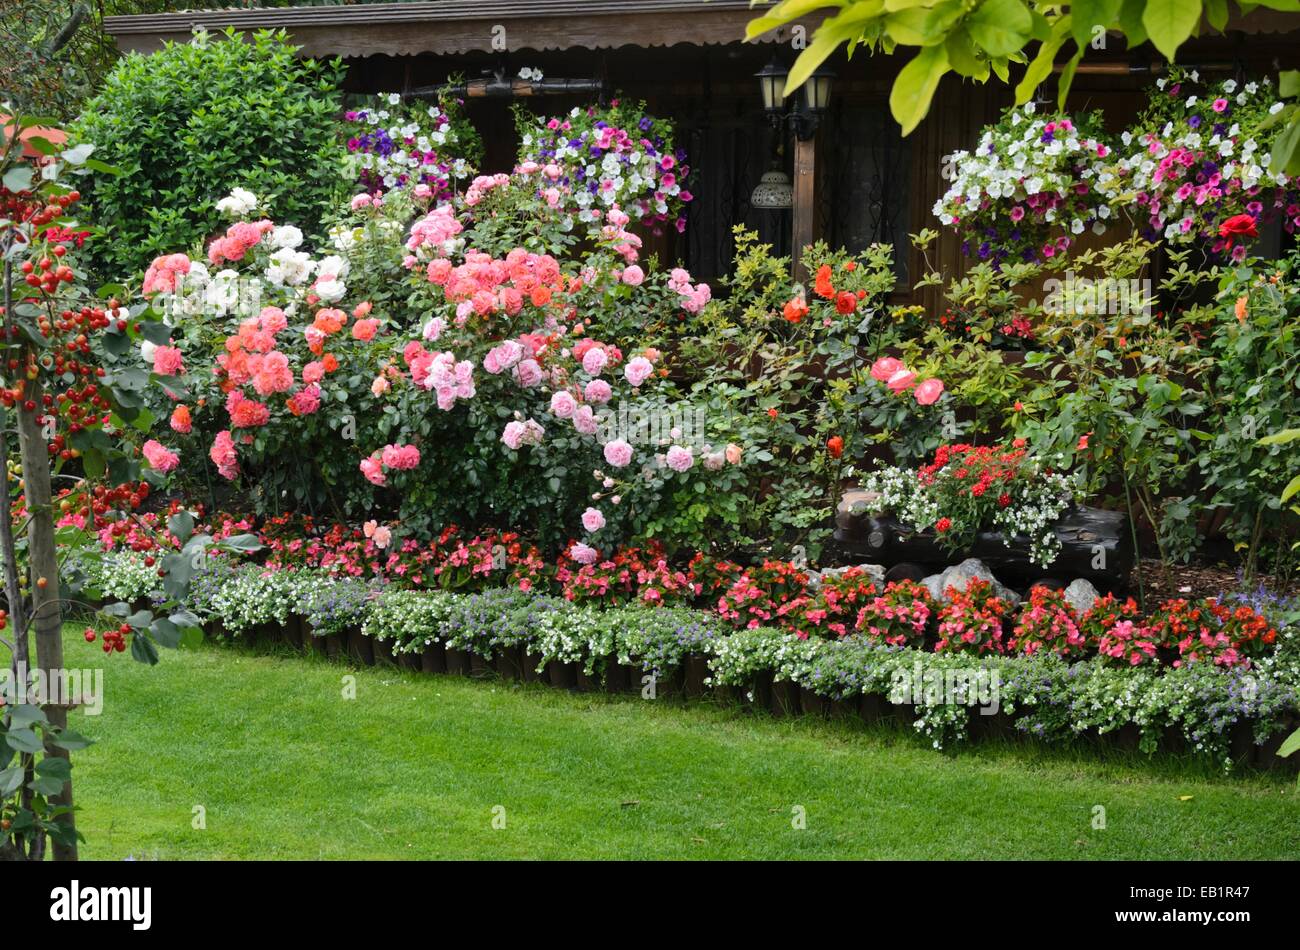 Roses (Rosa), begonias (Begonia) and petunias (Petunia) in front of a garden house Stock Photo